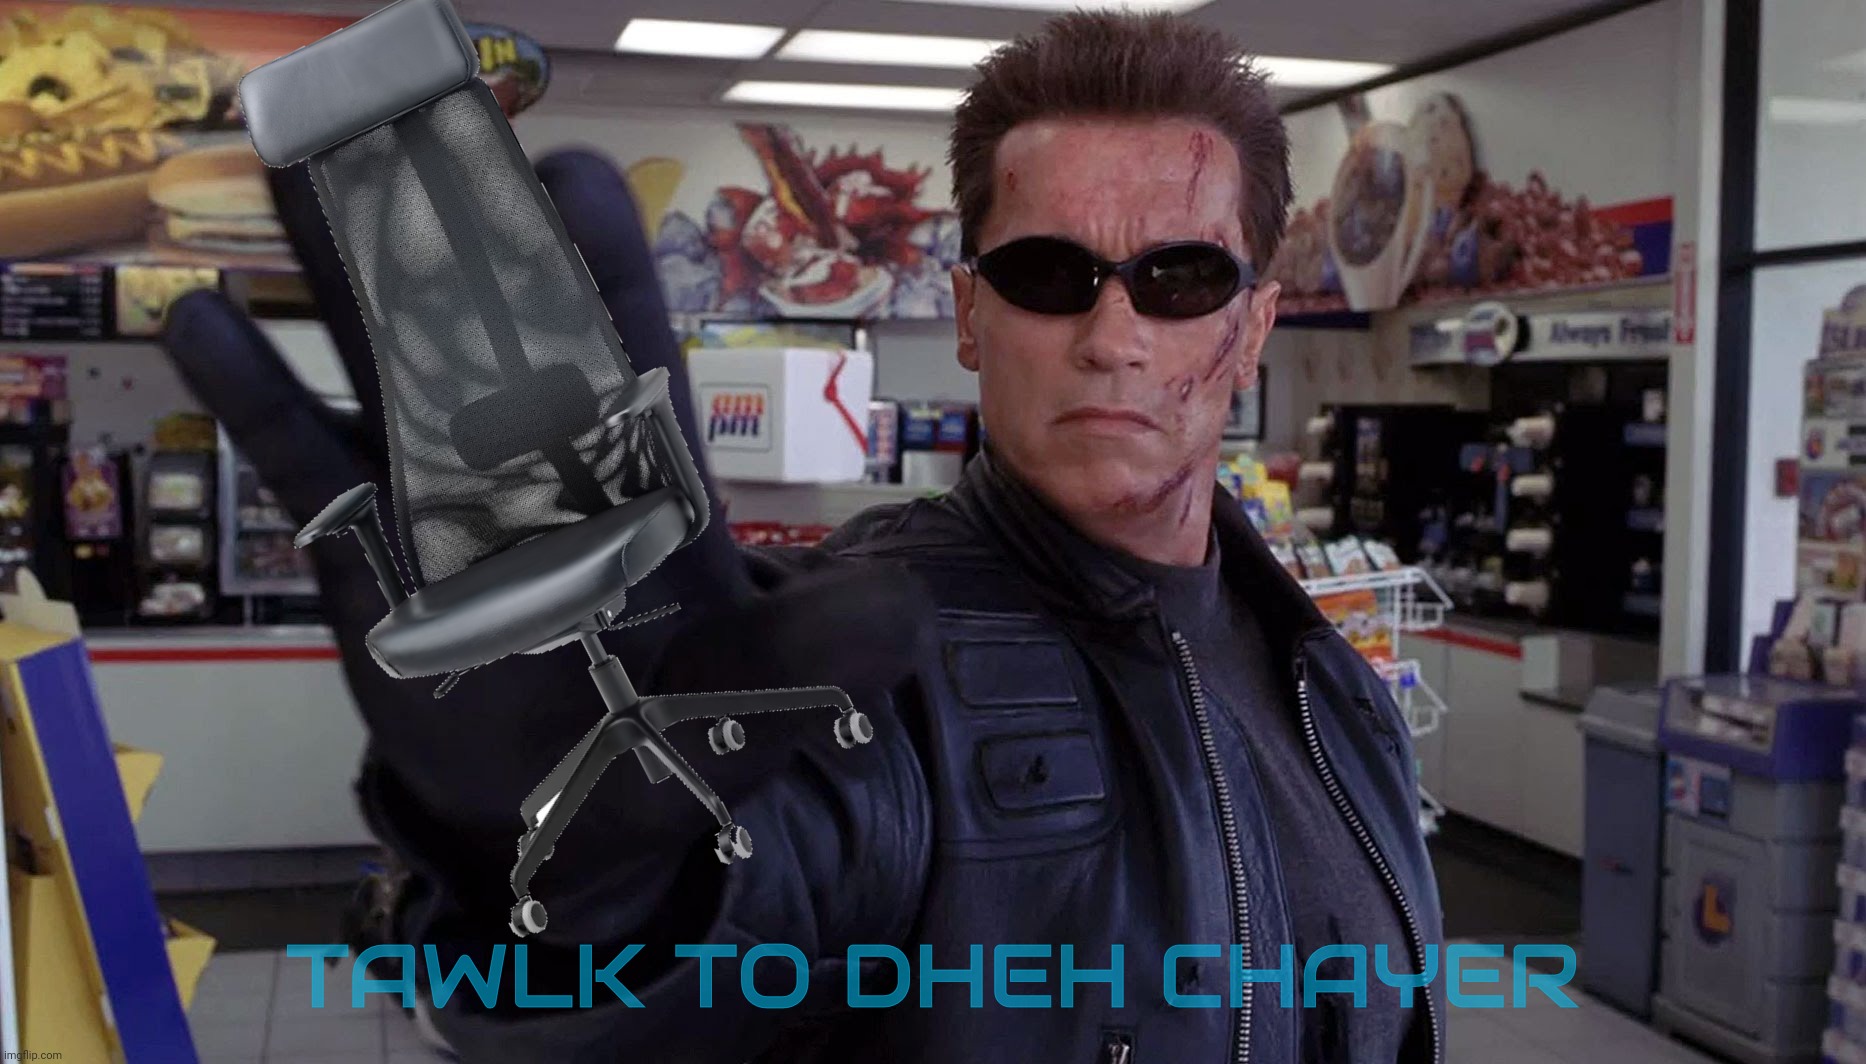 Talk to the chair because a Tweeterz sed tew dew eet | TAWLK TO DHEH CHAYER | image tagged in terminator - talk to the hand,talk to the chair,tweet this why don'tcha,tweeterz,i think therefore i repost,imagination nil | made w/ Imgflip meme maker